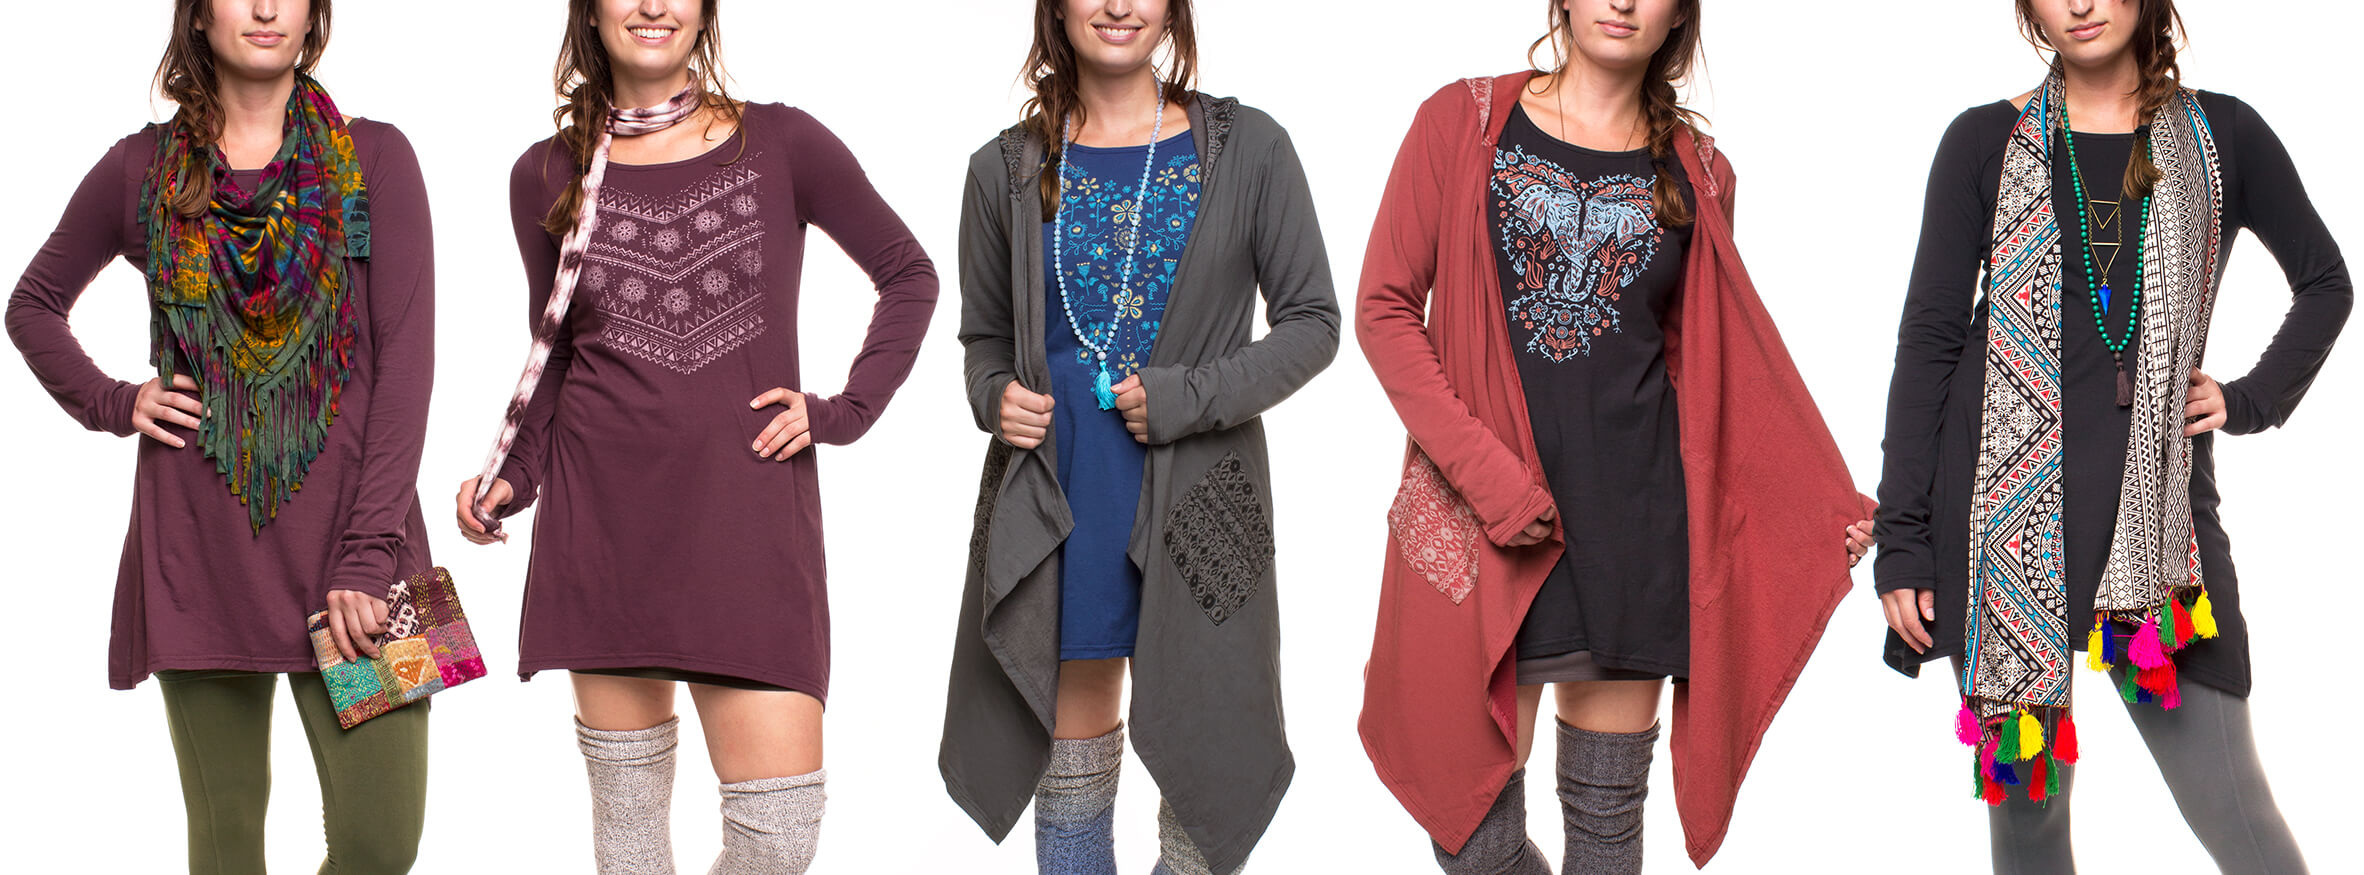 Facebookbanner 13 - 6 Ways to Style Our Organic Cotton Tunic Tops